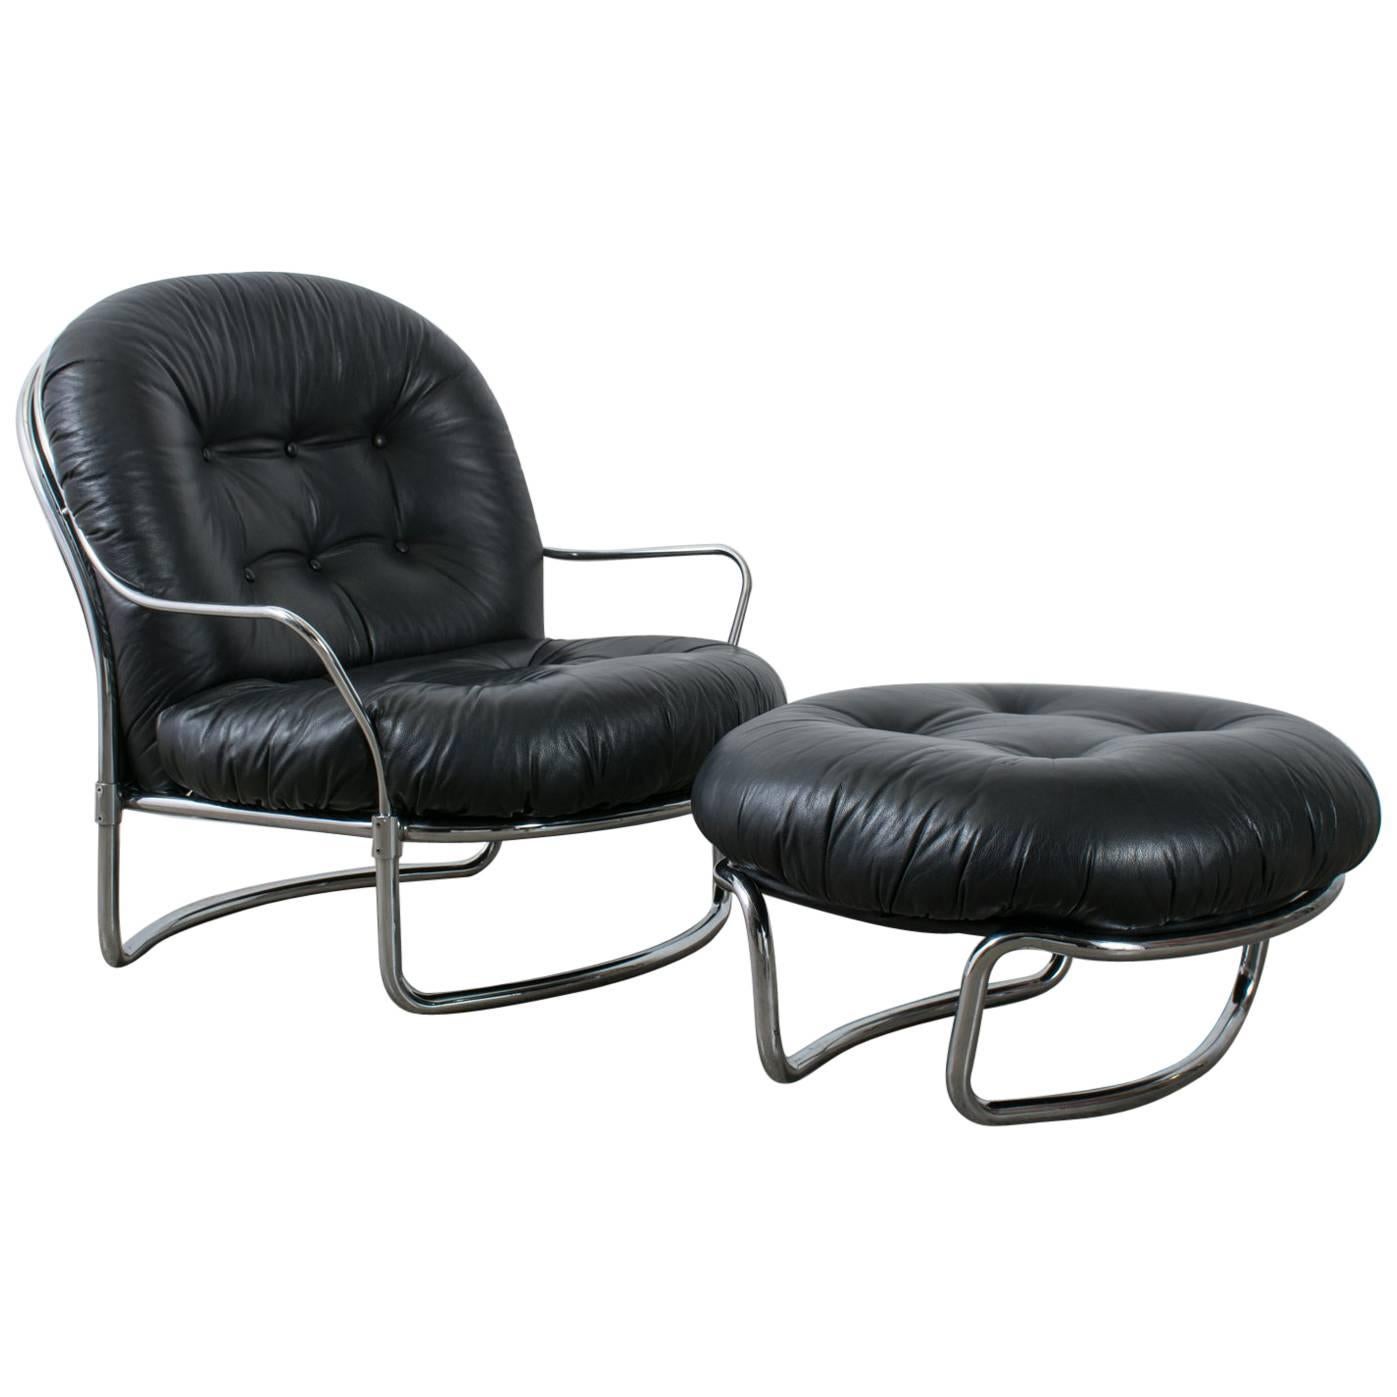 Carlo di Carli Black Leather Lounge Chair and Ottoman, Italy, 1960s For Sale